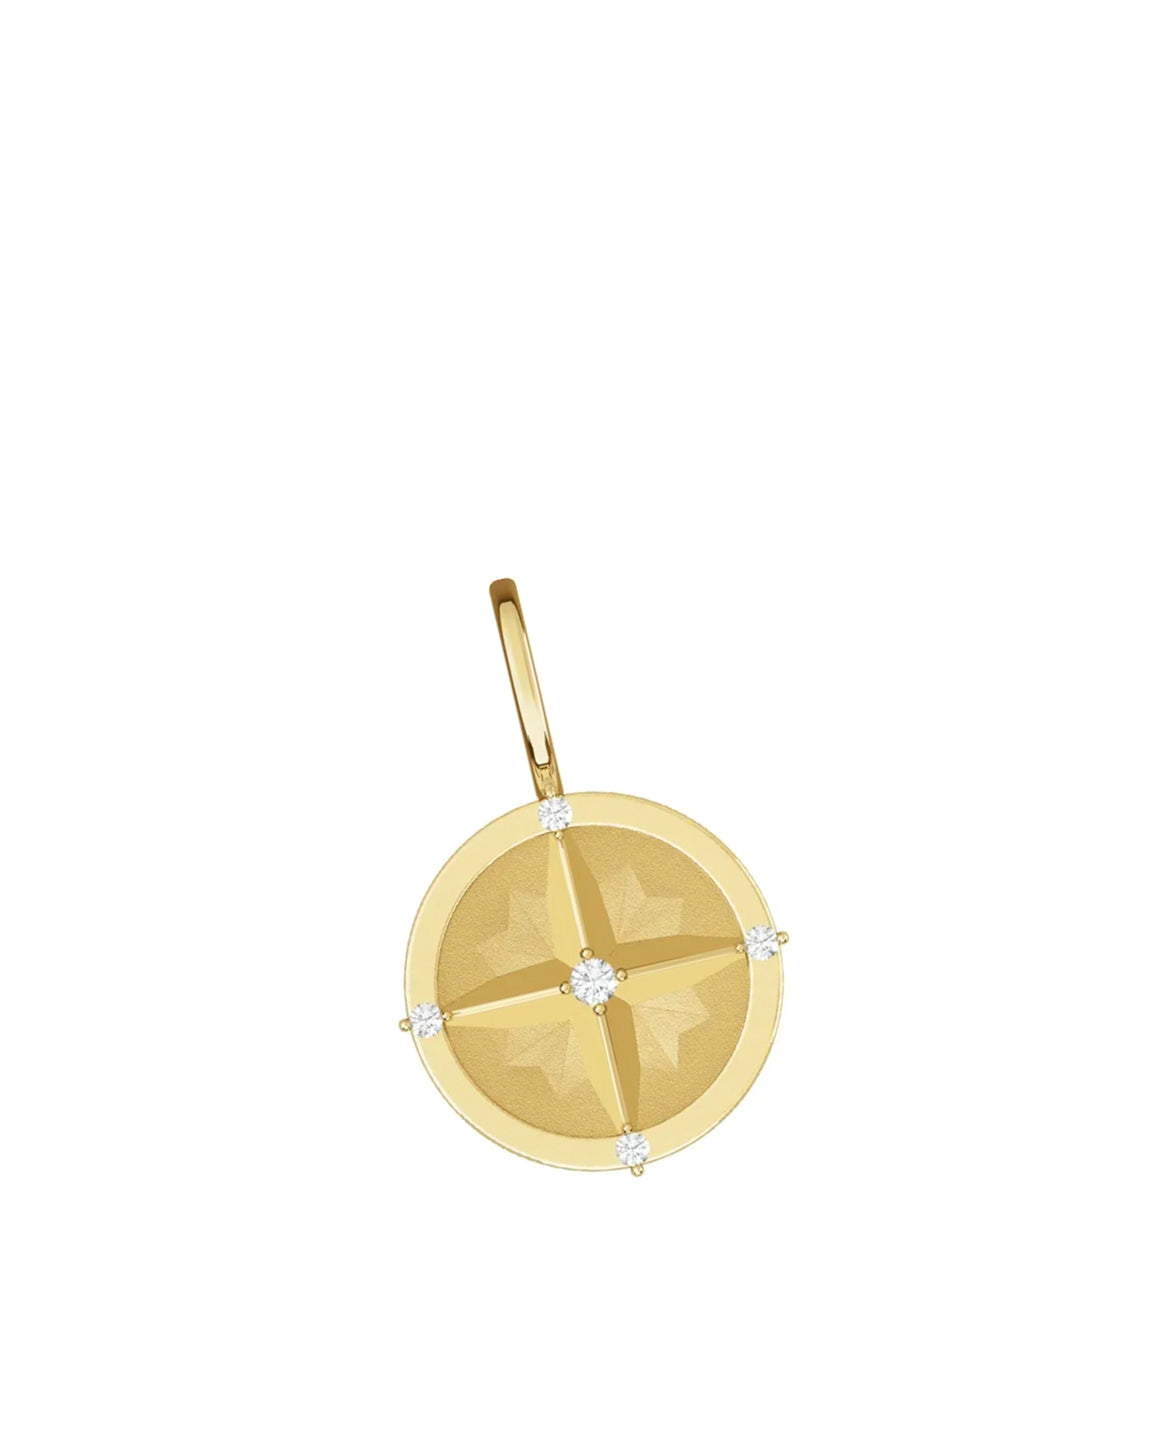 14k gold compass design pendant with five dainty diamonds in cardinal directions